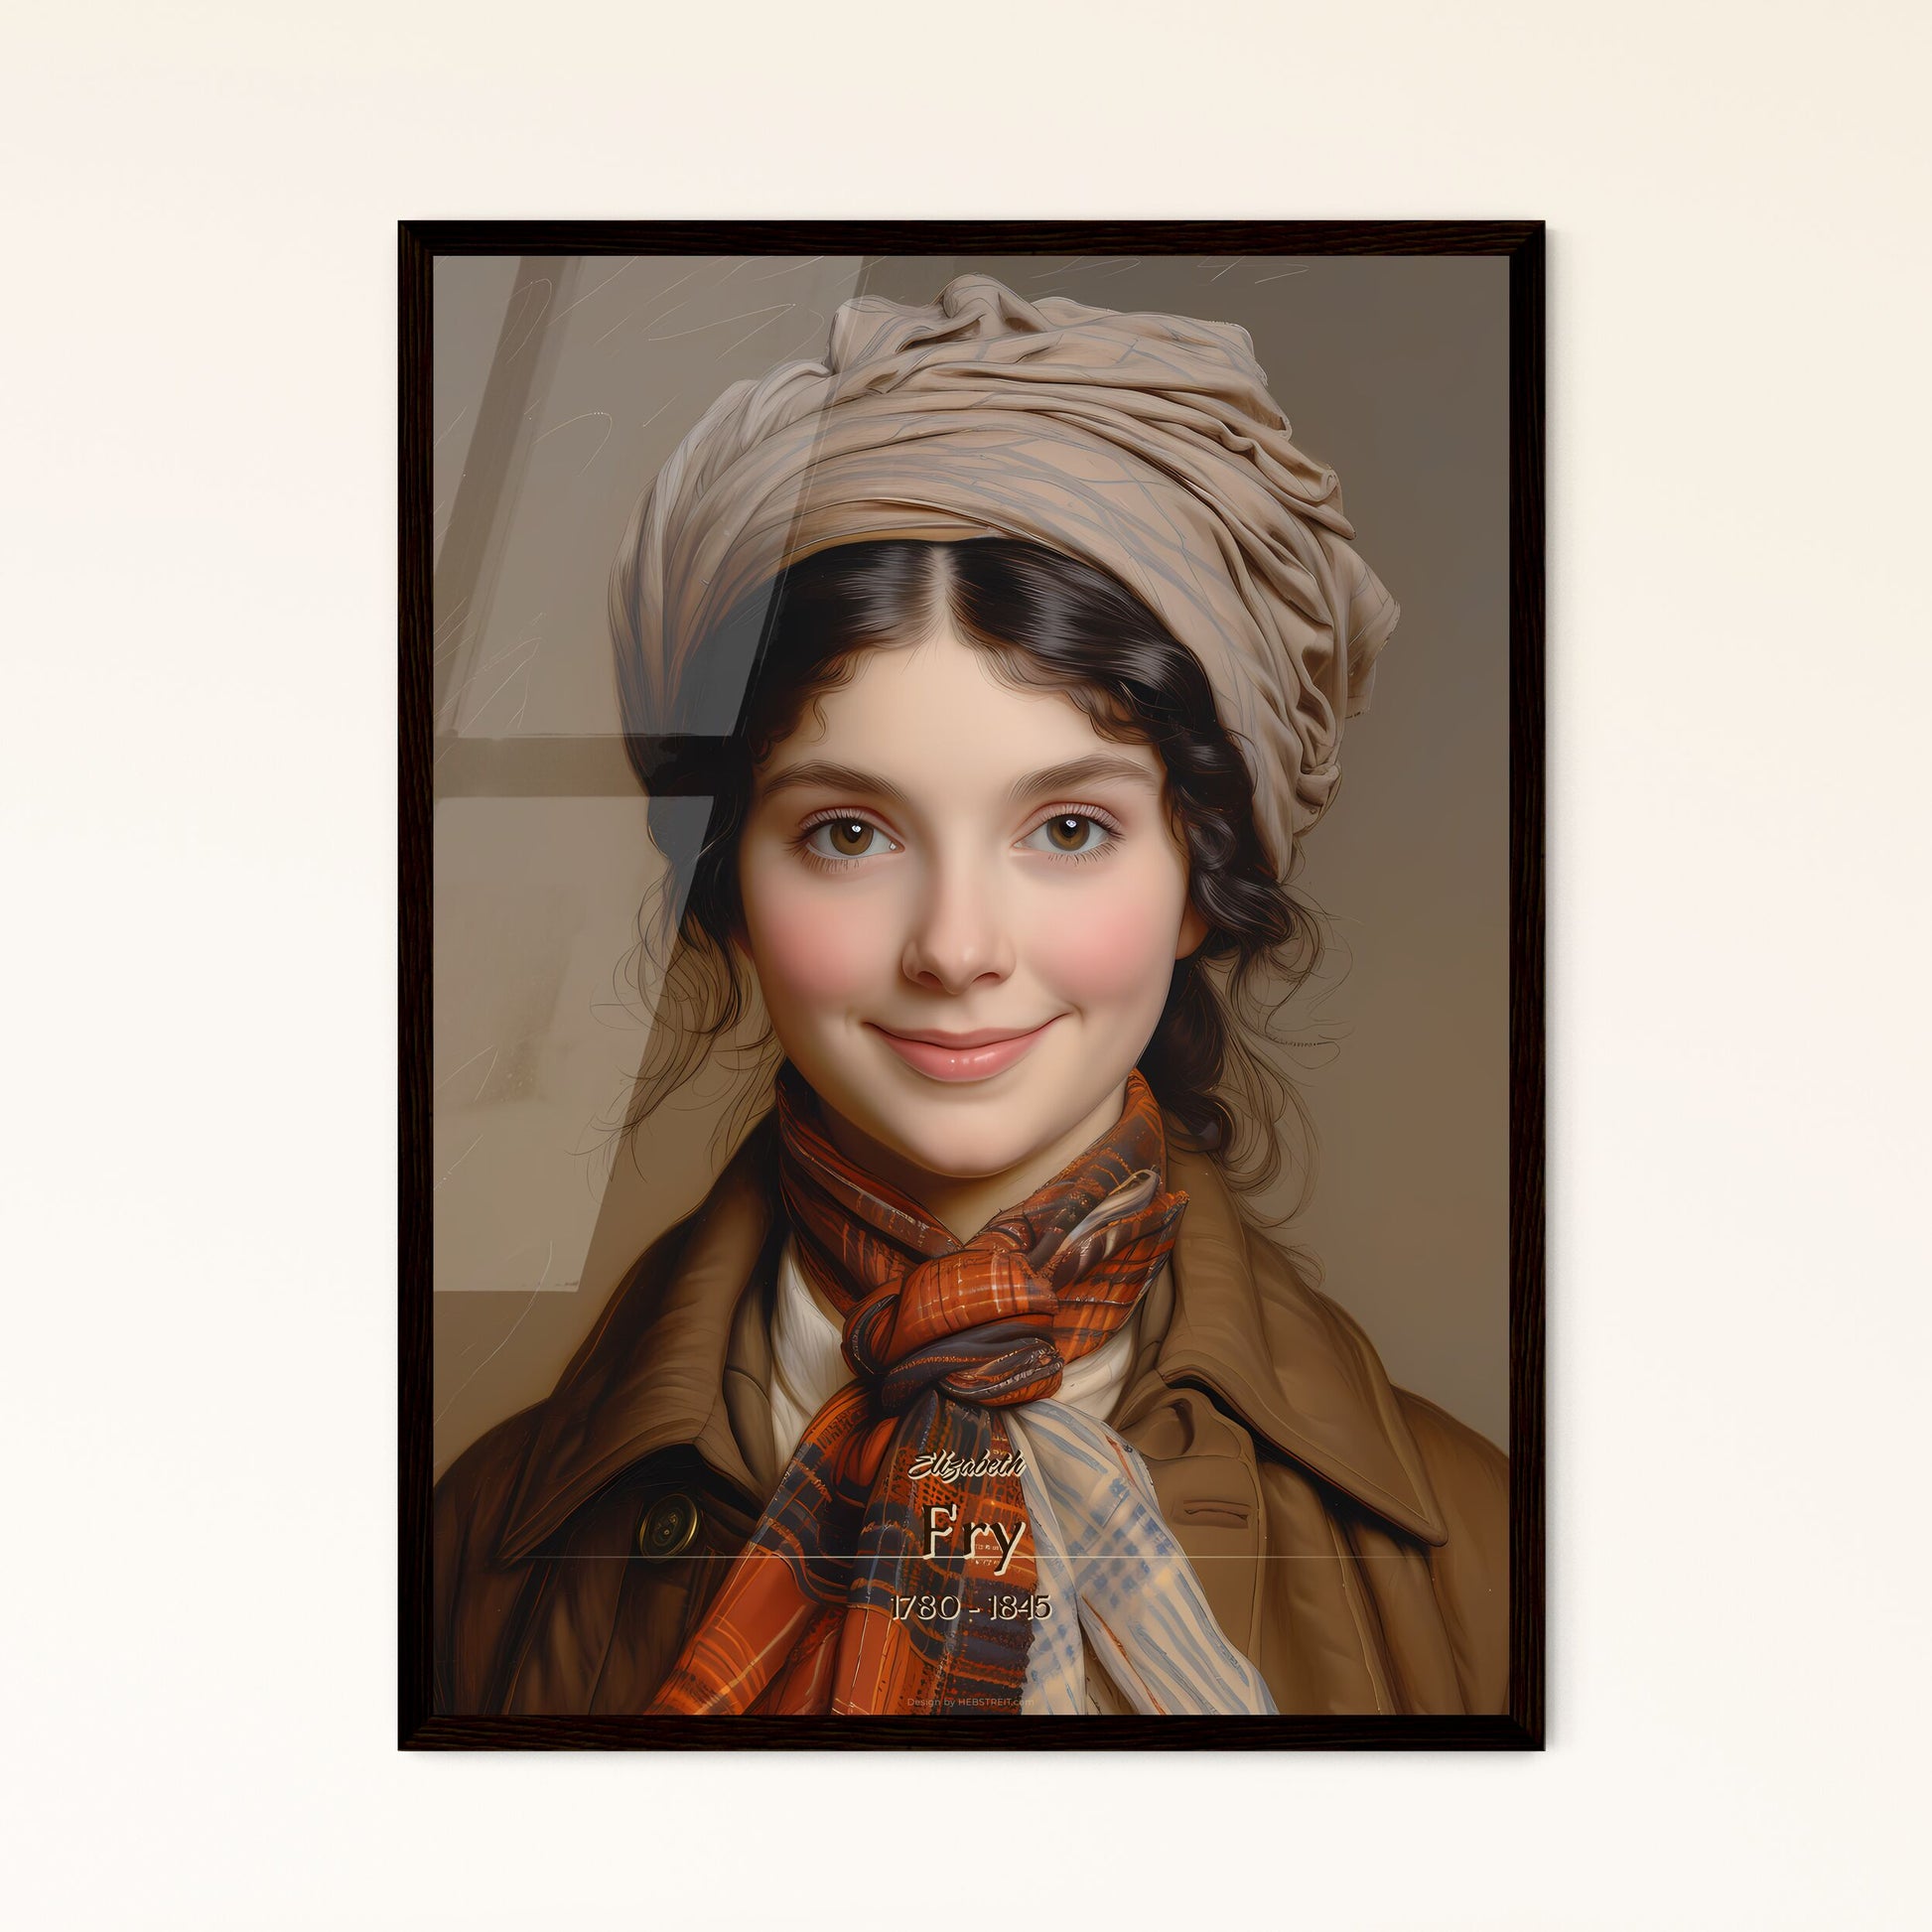 Elizabeth, Fry, 1780 - 1845, A Poster of a woman with a scarf on her head Default Title